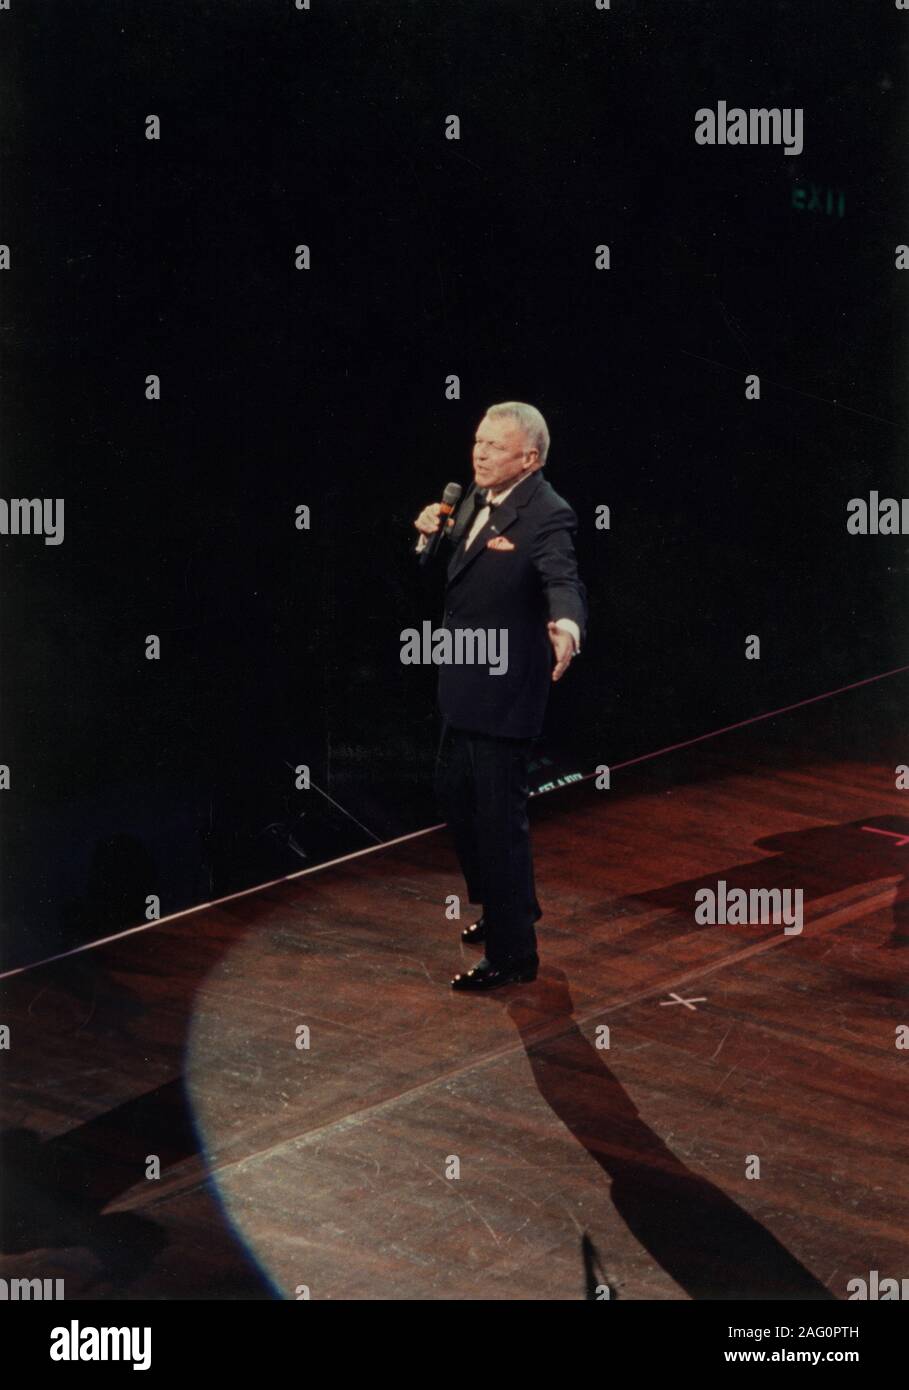 Frank Sinatra, Royal Albert Hall, London, 1989. In April 1989, three of the greatest icons of American popular music, Frank Sinatra, Liza Minnelli and Sammy Davis Jr, came together in Frank, Liza and Sammy: The Ultimate Event. Stock Photo